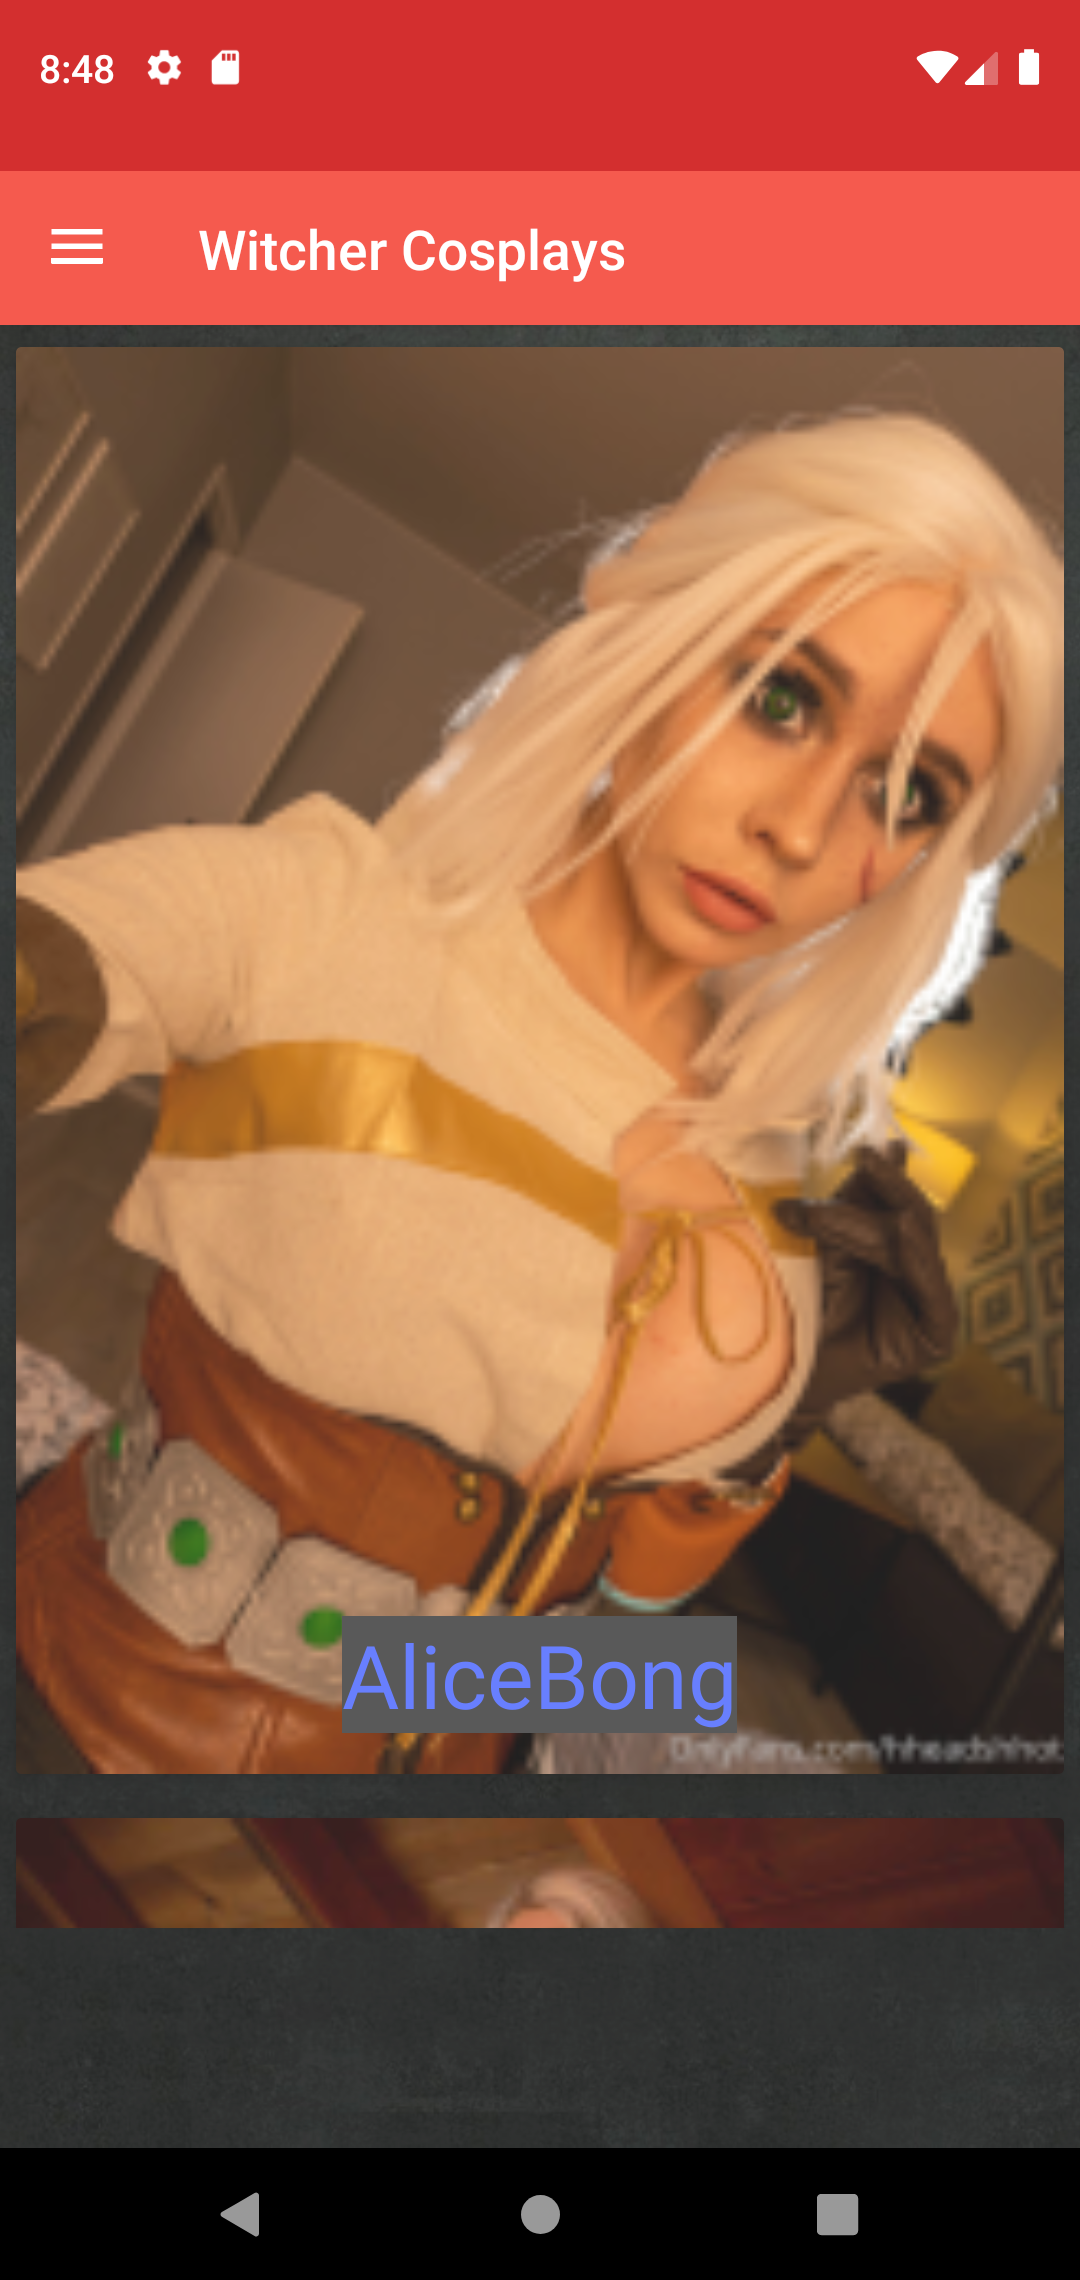 Witcher Cosplays anime,wallpapers,android,galleries,hintai,cosplay,sexy,witcher,for,panties,pictures,comics,aletta,cfnm,erotic,hentai,and,puzzle,ocean,pic,app,picture,hot,best,manga